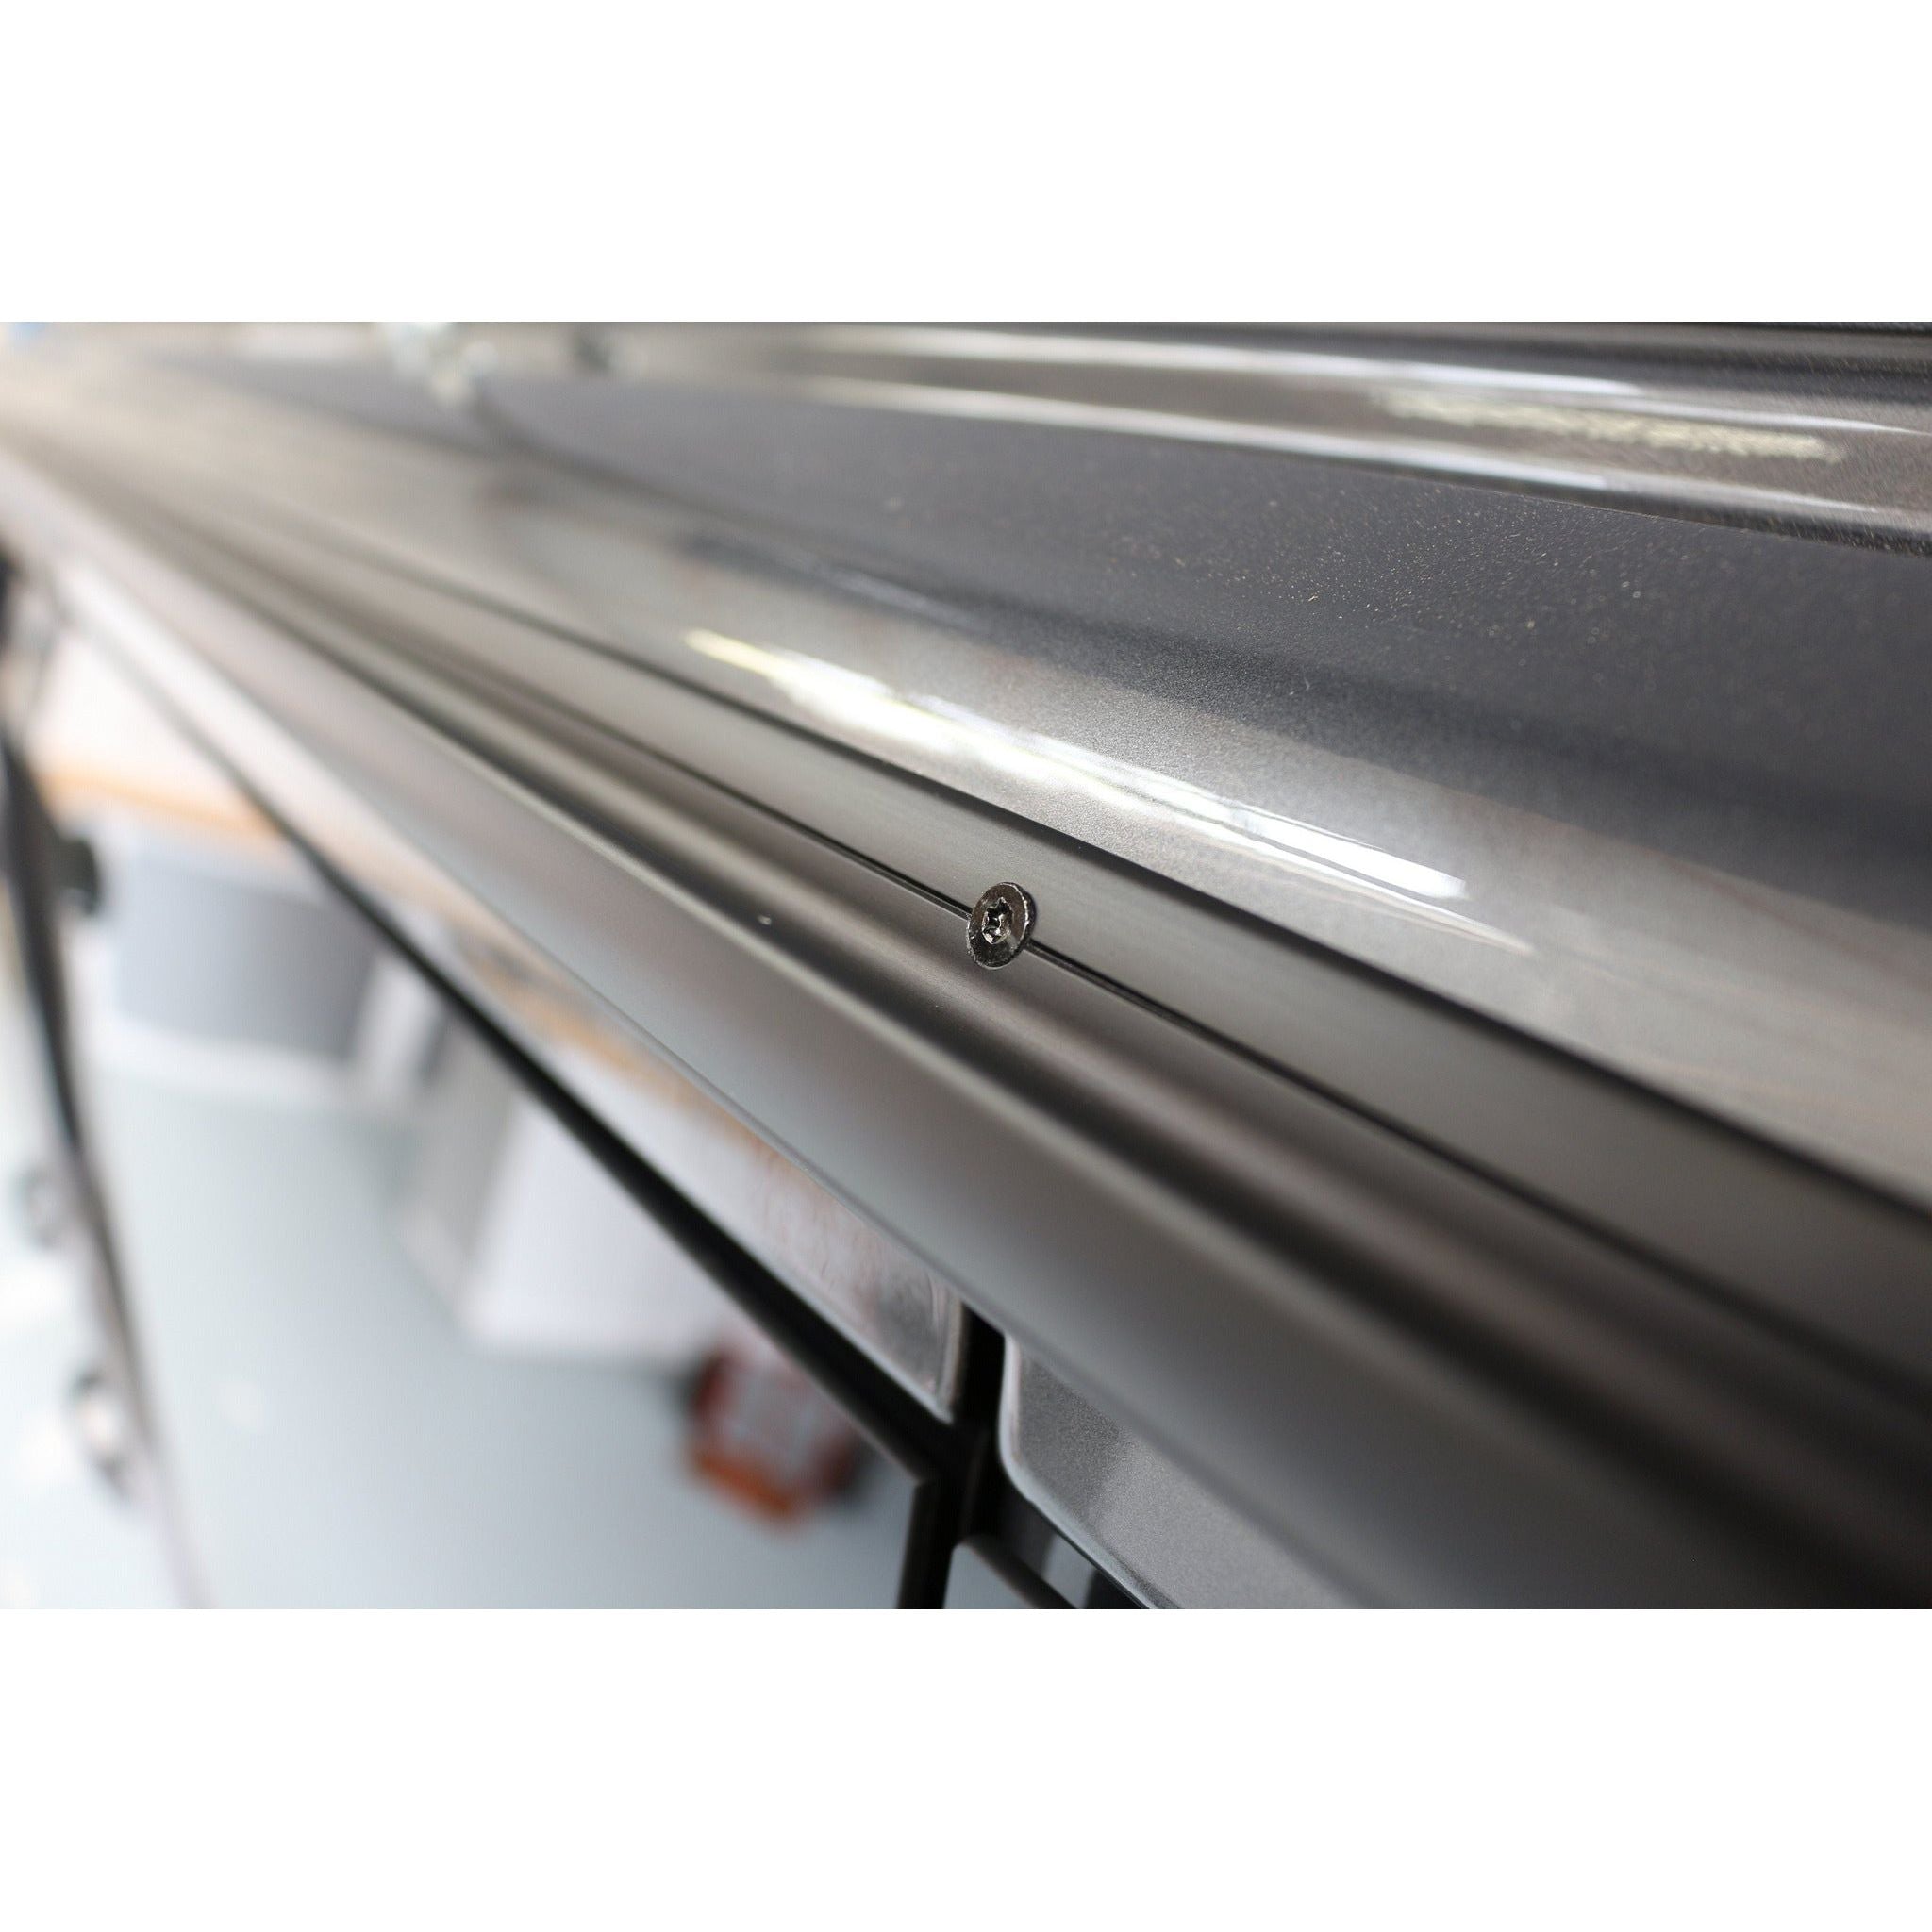 Reimo Multirail Awning & Gutter Rail (With End Caps) - T4/T5/T6 UK Reimo 